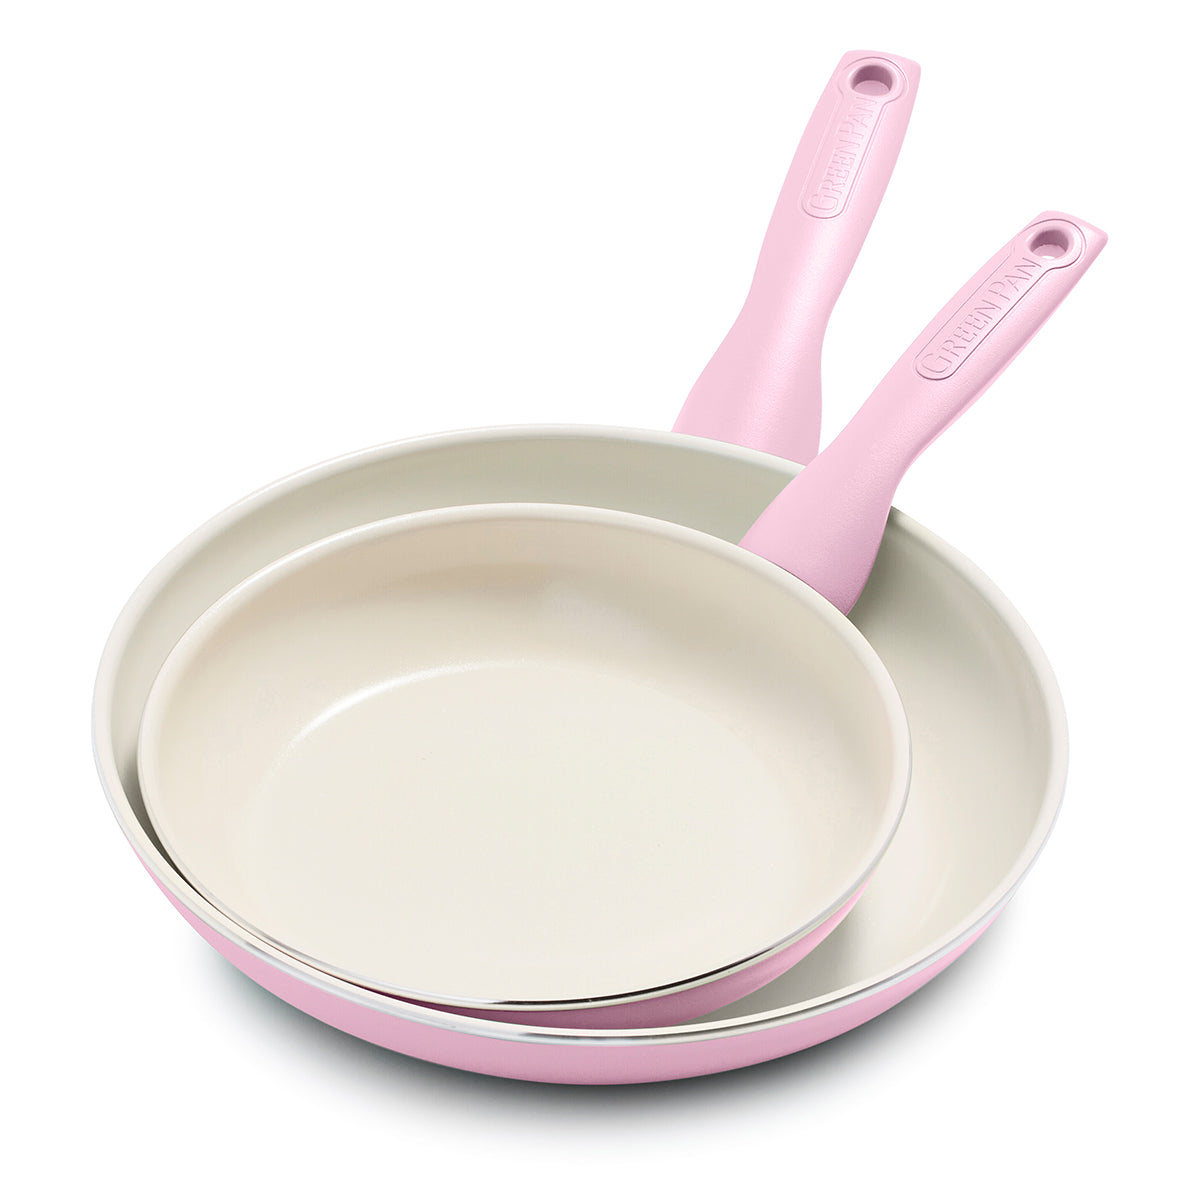 Nonstick Frying Pan Set with Lid, 8 9.5 and 11 Non stick Frying Pan Set,  Pink Pan Frying Pan Skillet Set Omelette Pan Healthy Stone Cookware, PFOA